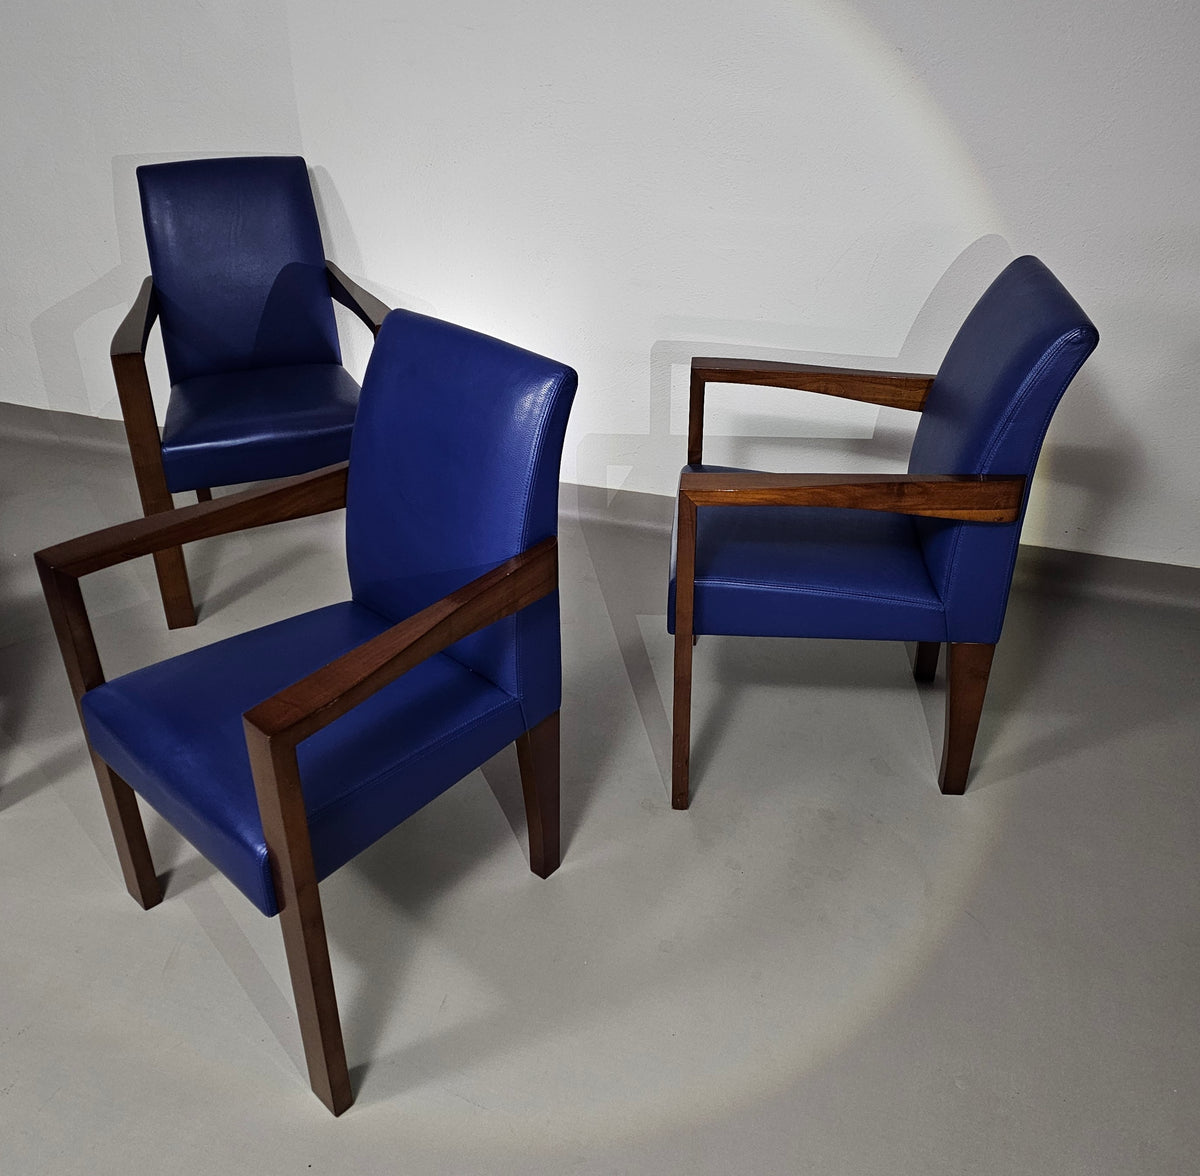 4 x Hugues Chevalier conference Ying Bridge chair / leather